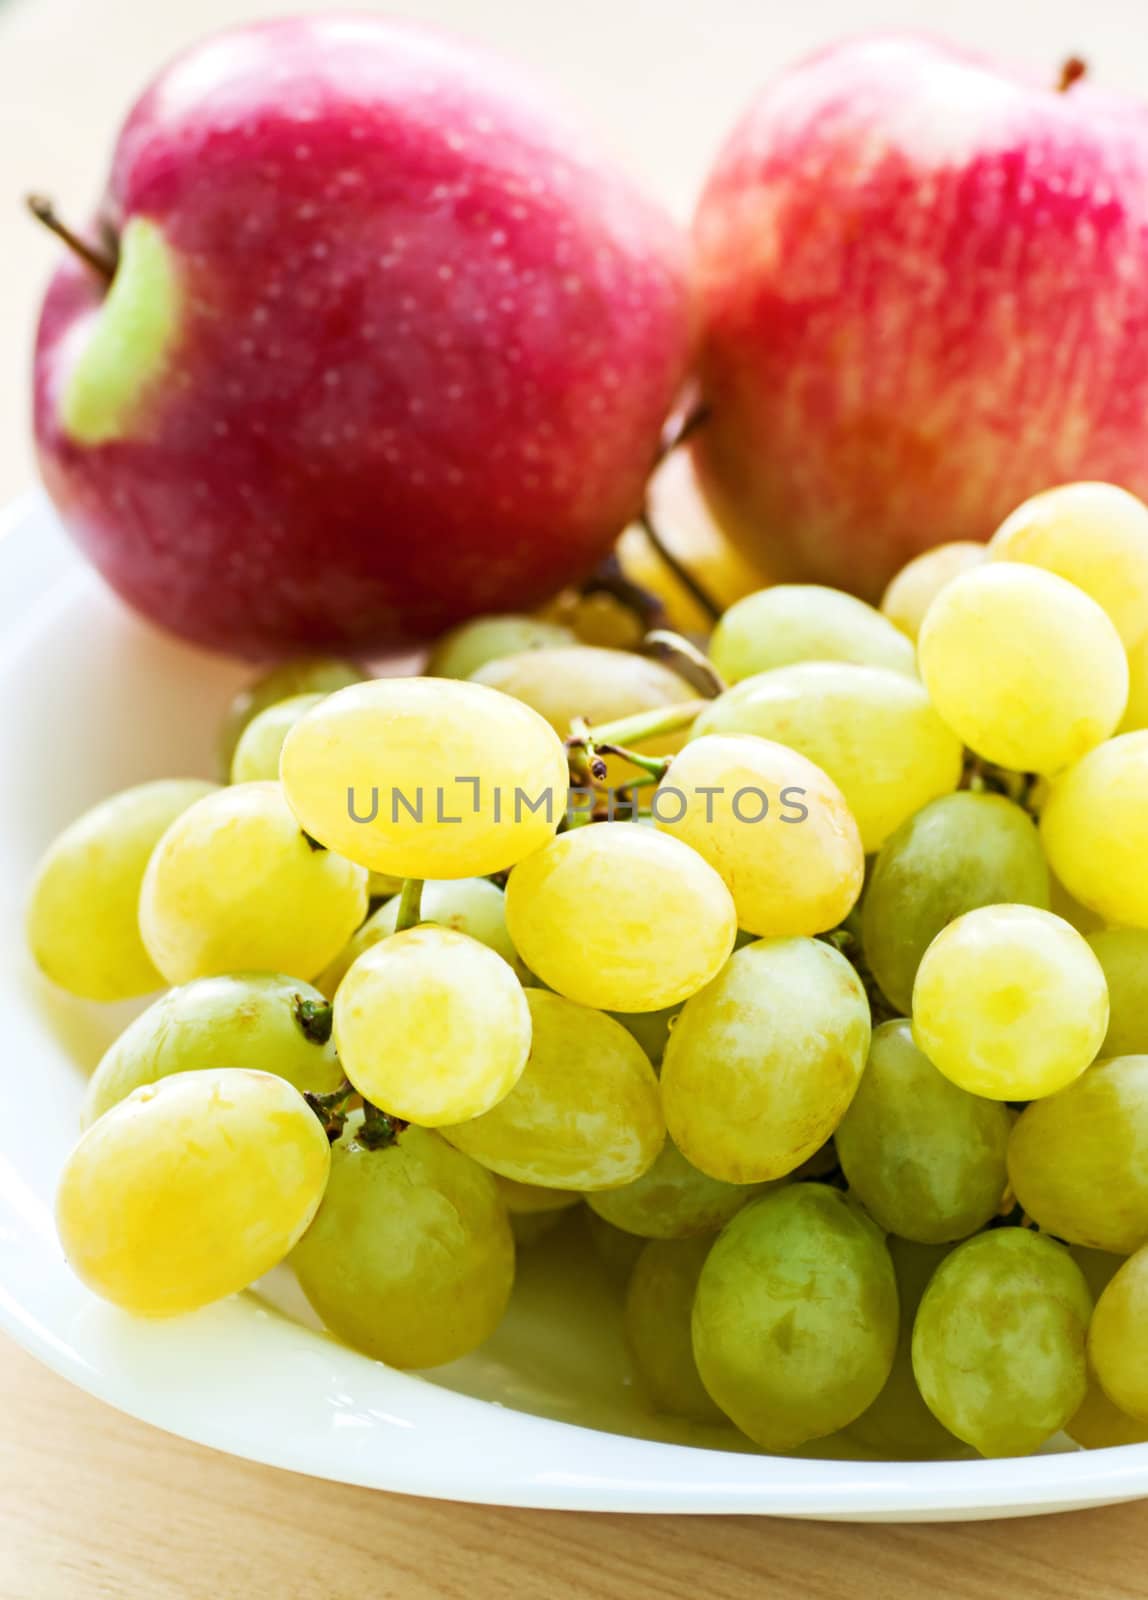 Apple and grape fruit on dish, on white background by Zhukow